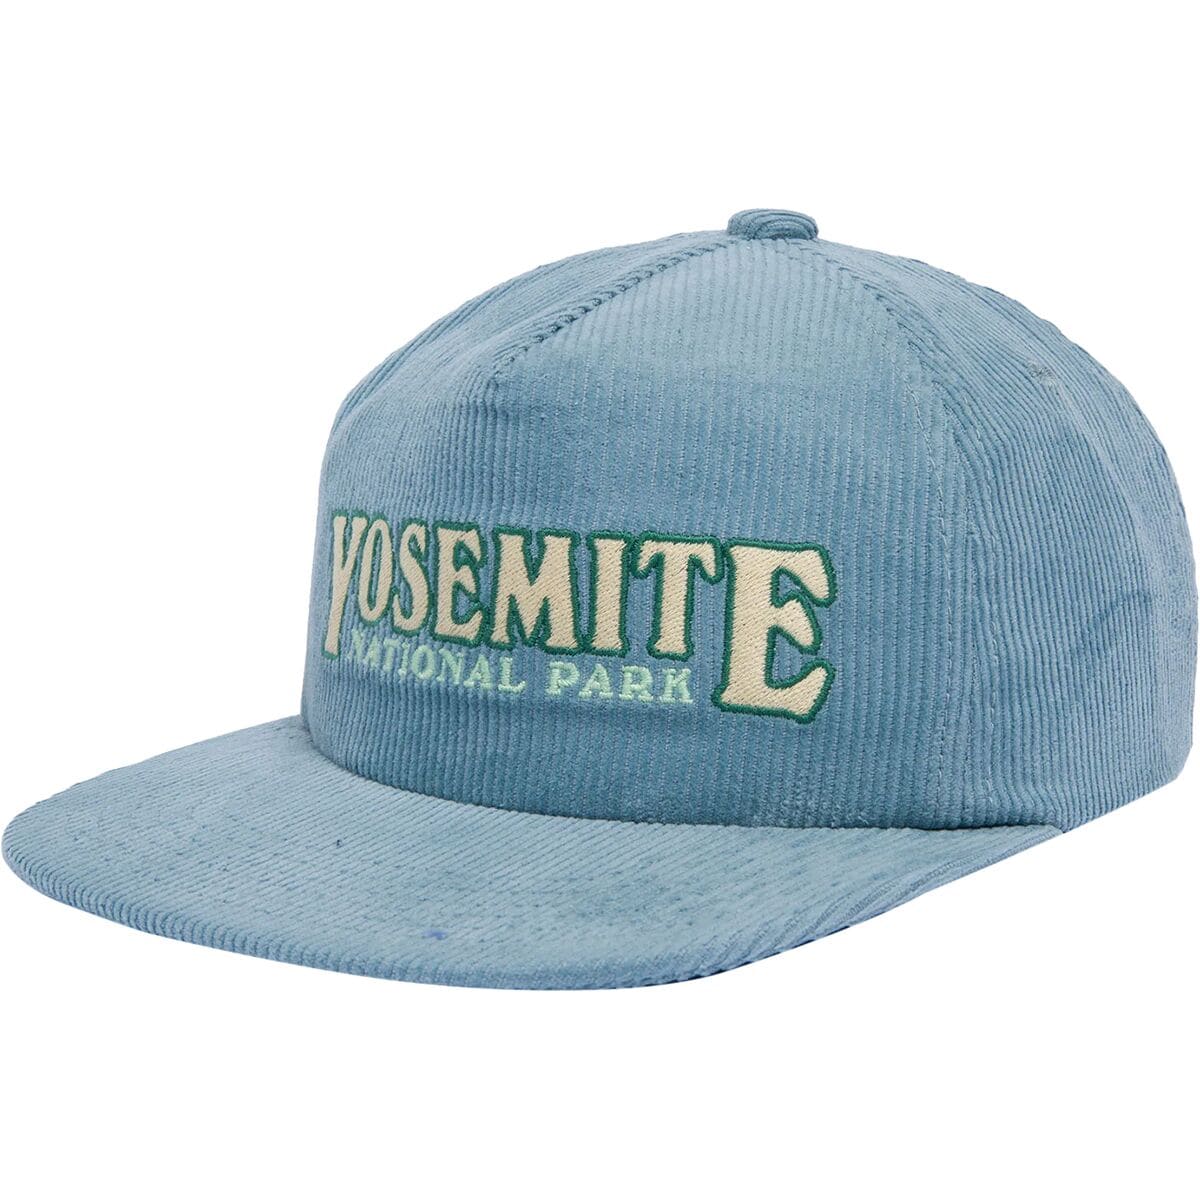 Parks Project Yosemite NP Cord Hat